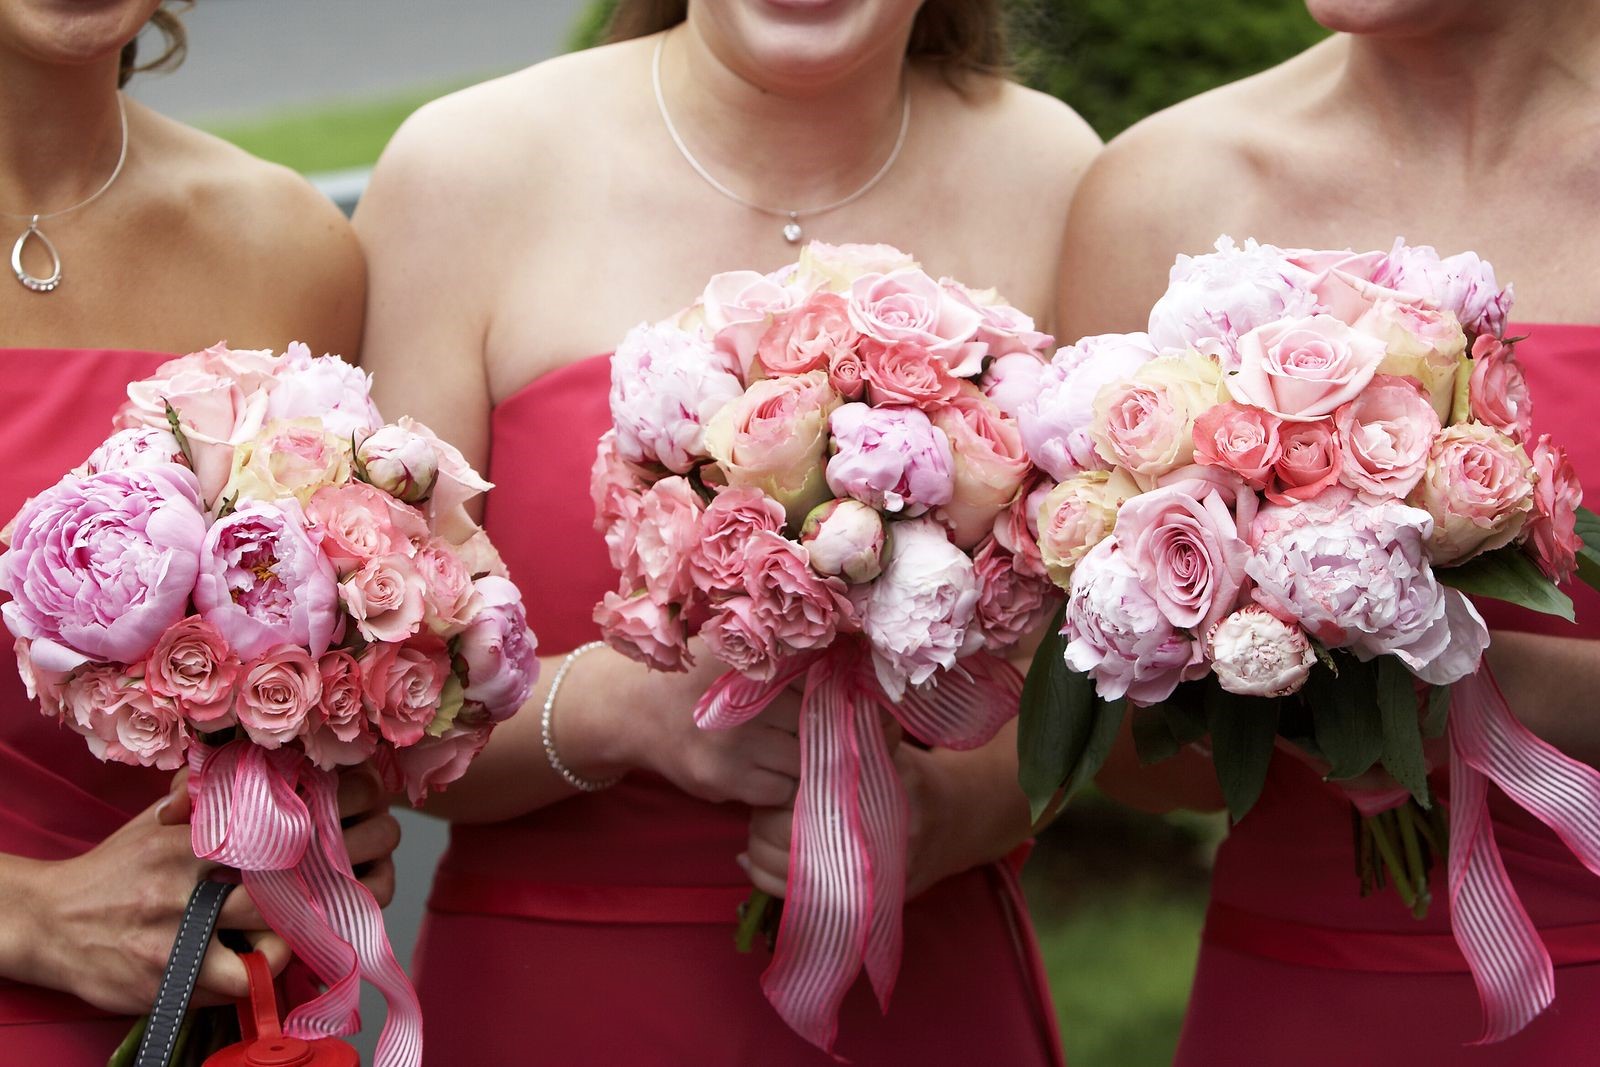 Picking Wedding Flowers That Will Go Best with Your Big Day’s Theme